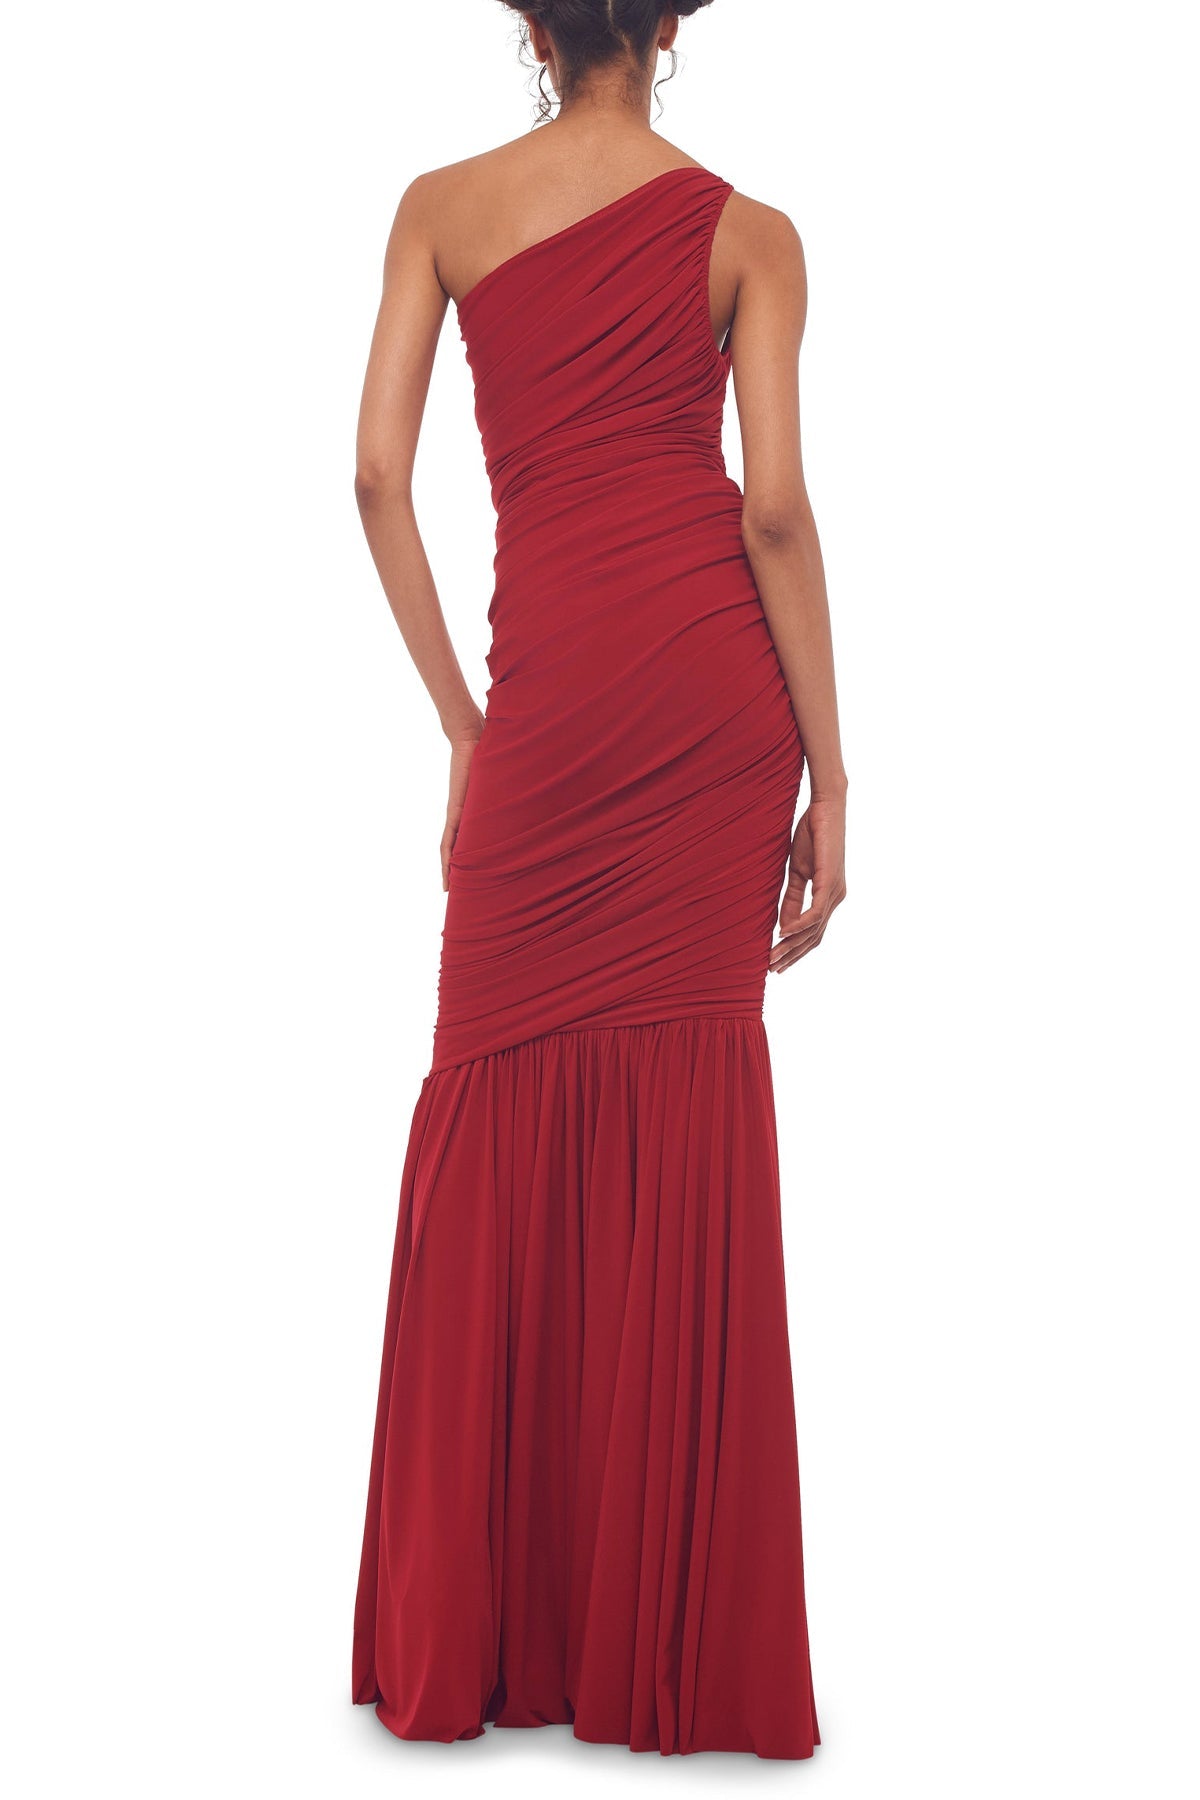 Diana Fishtail Gown in Red - shop-olivia.com